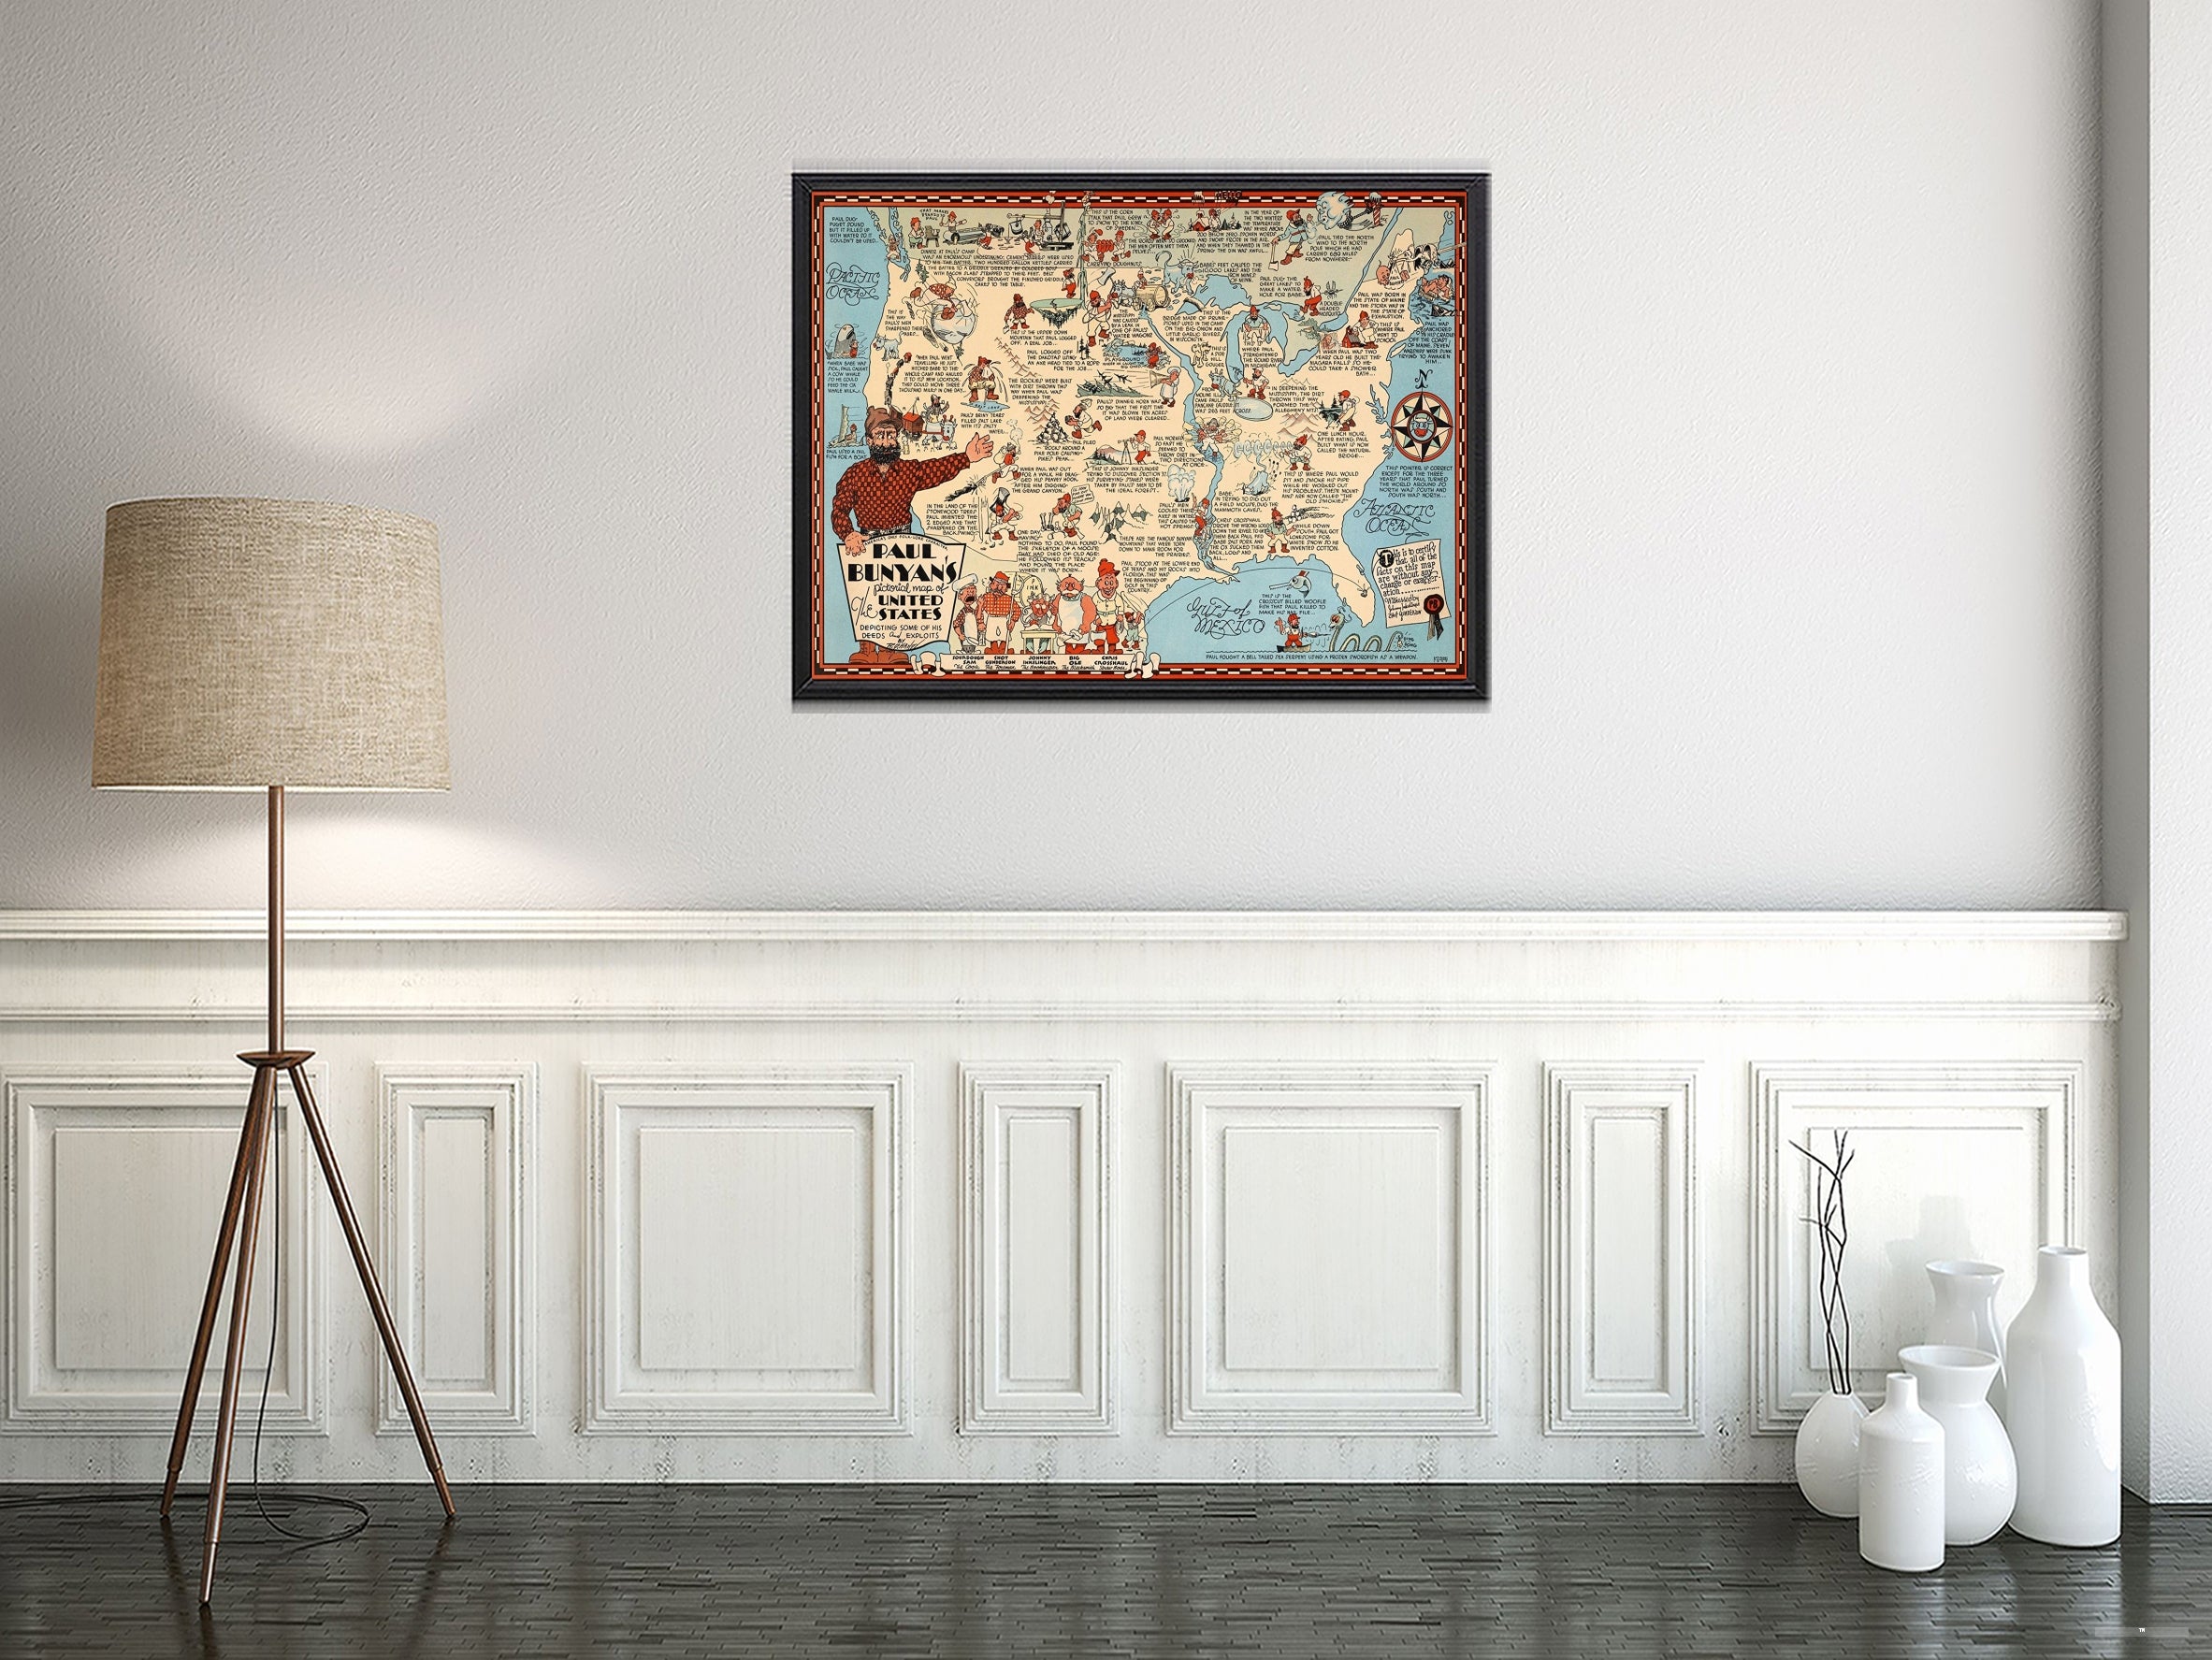 Paul Bunyan's pictorial map of the United States, 1935, Historic Antique Vintage Map Reprint